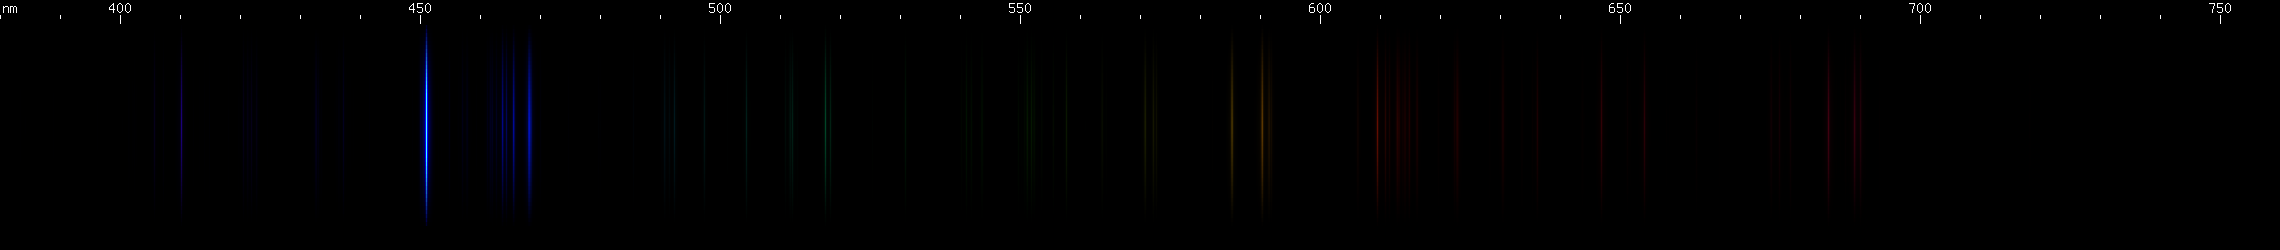 Spectral Lines of Indium